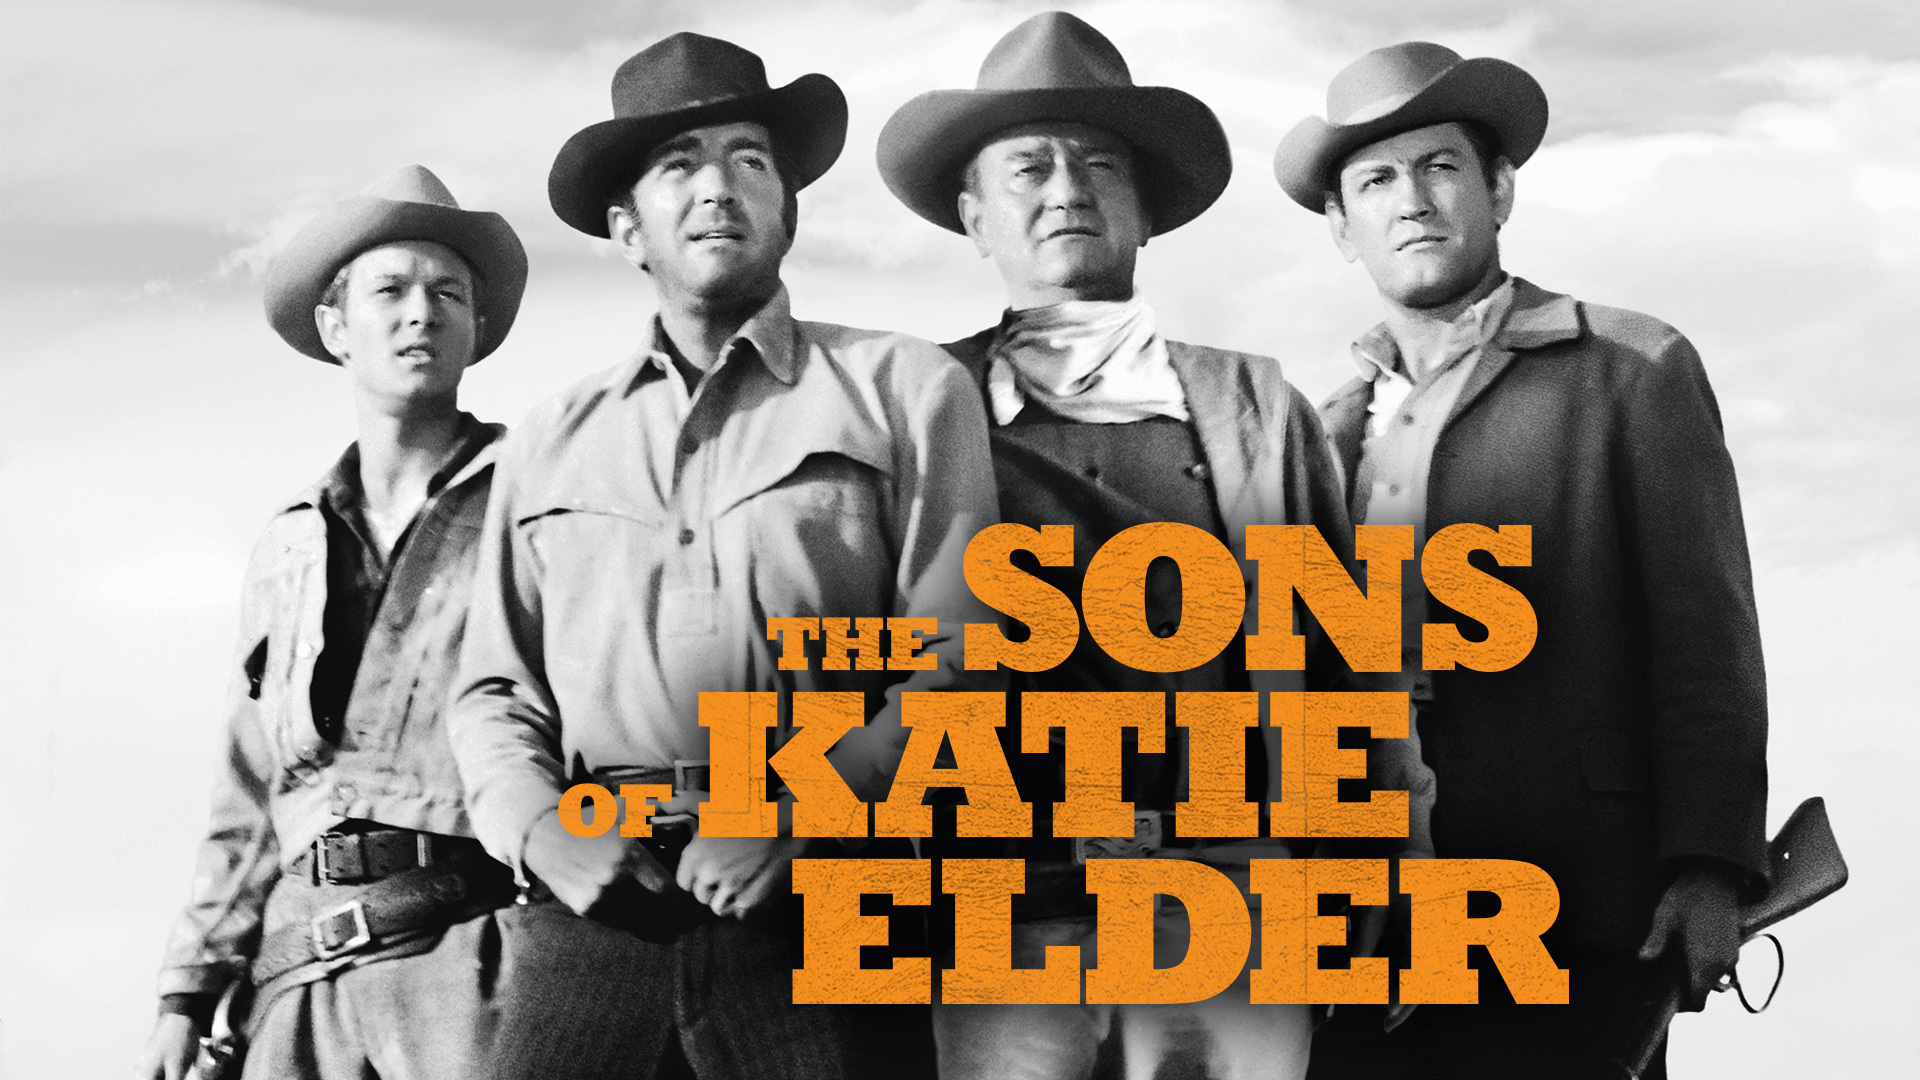 49-facts-about-the-movie-the-sons-of-katie-elder